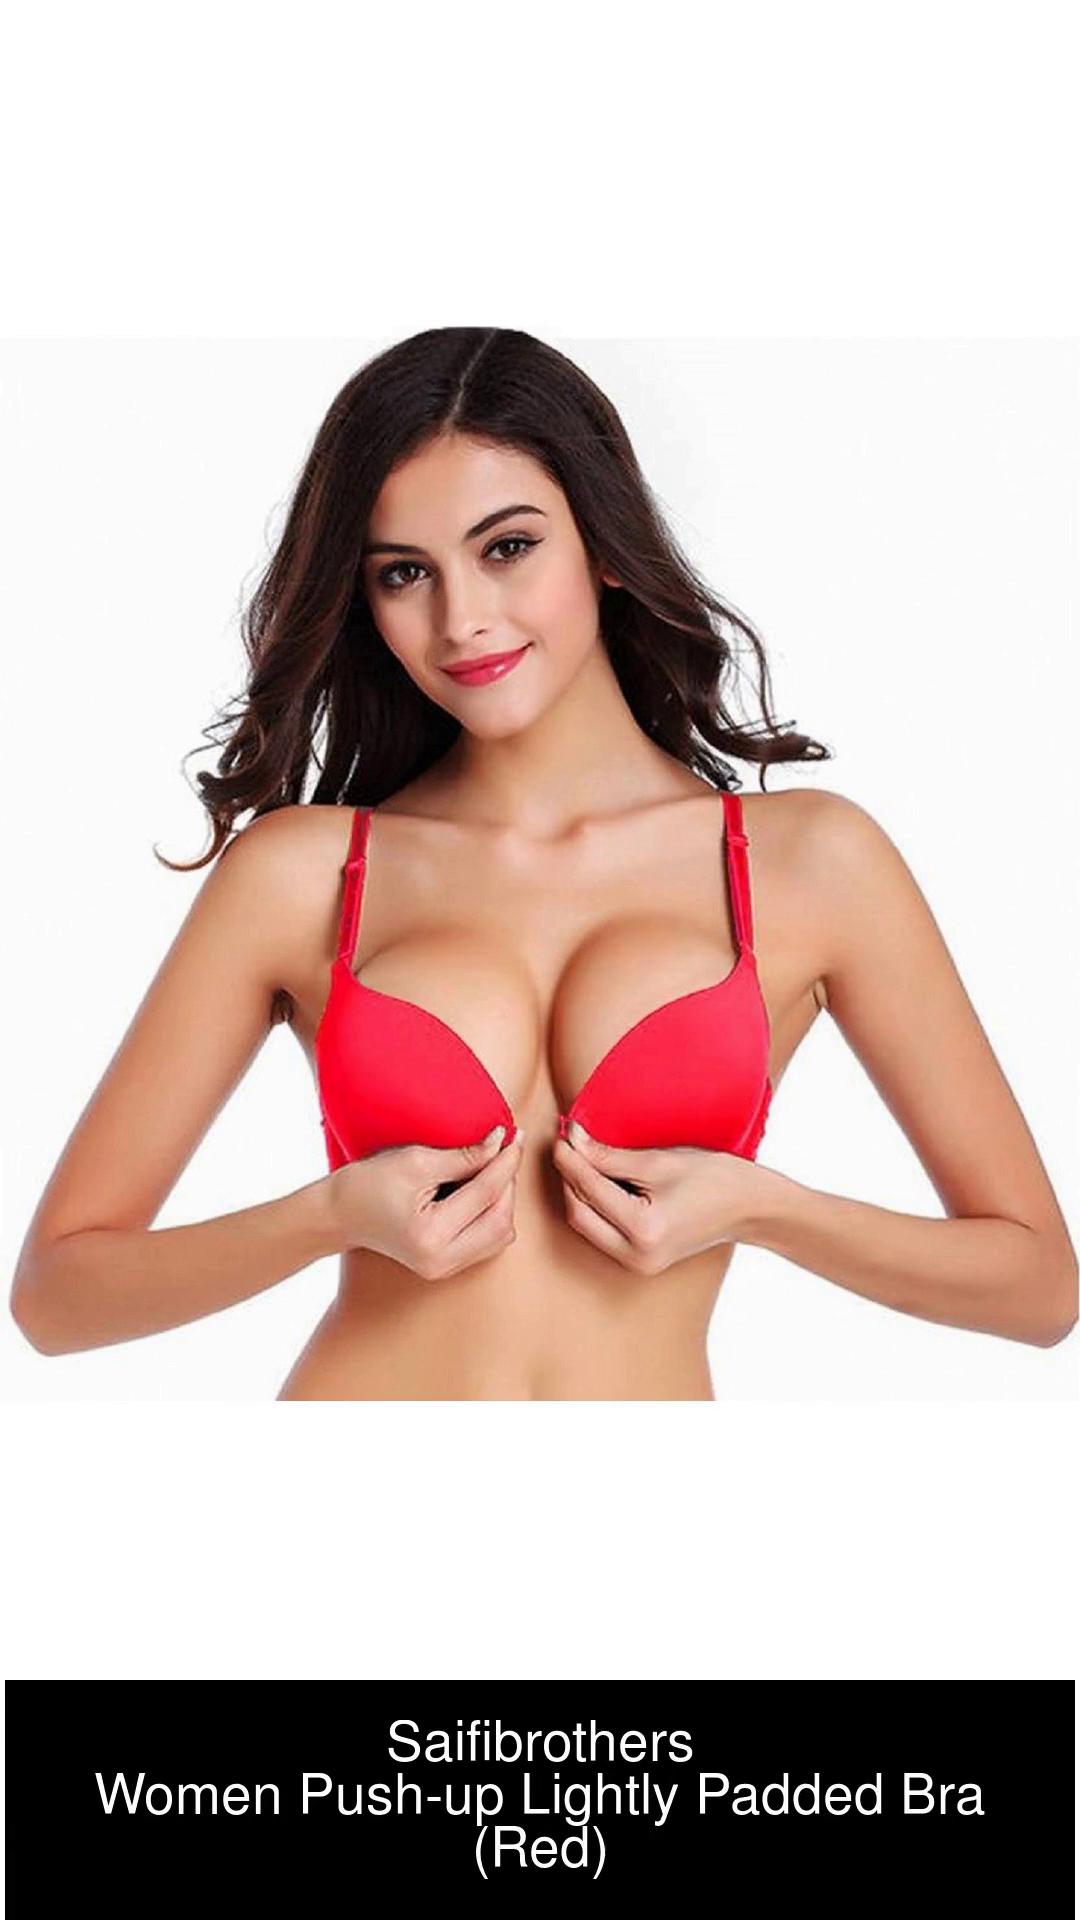 Saifibrothers Women's Push-up Heavily Padded Bra Women Push-up Lightly  Padded Bra